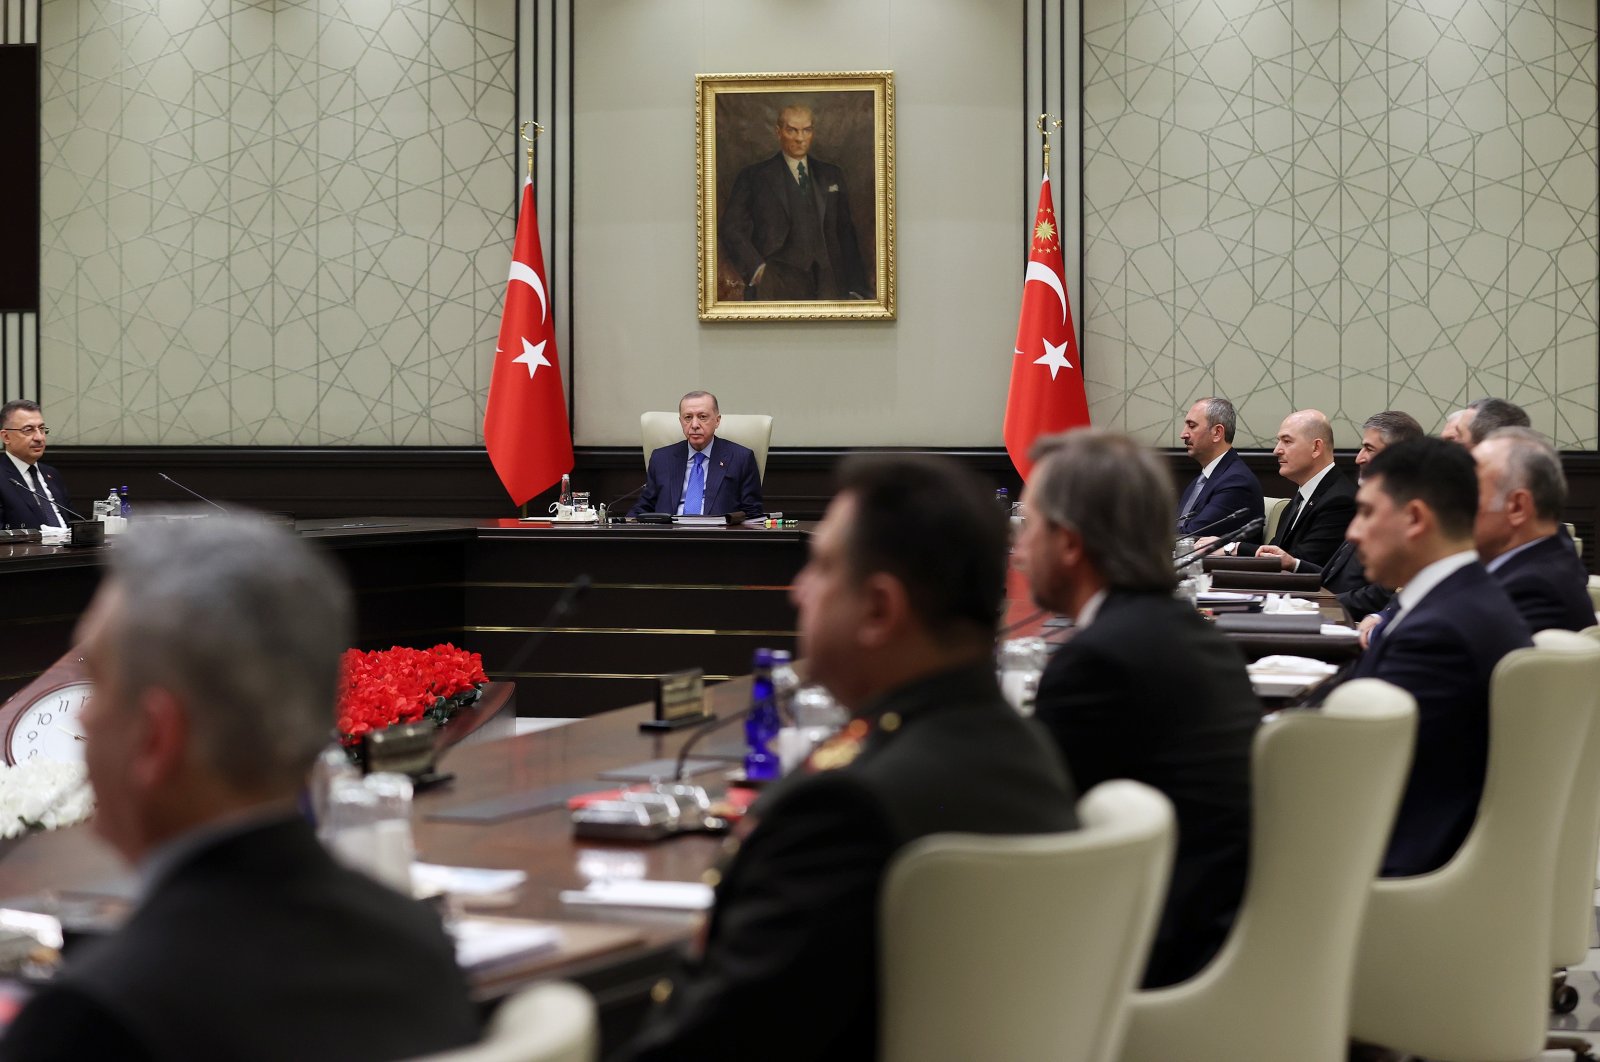 Members of the National Security Council chaired by President Recep Tayyip Erdoğan meet in the capital Ankara, Turkey, Jan. 27, 2022. (AA Photo)